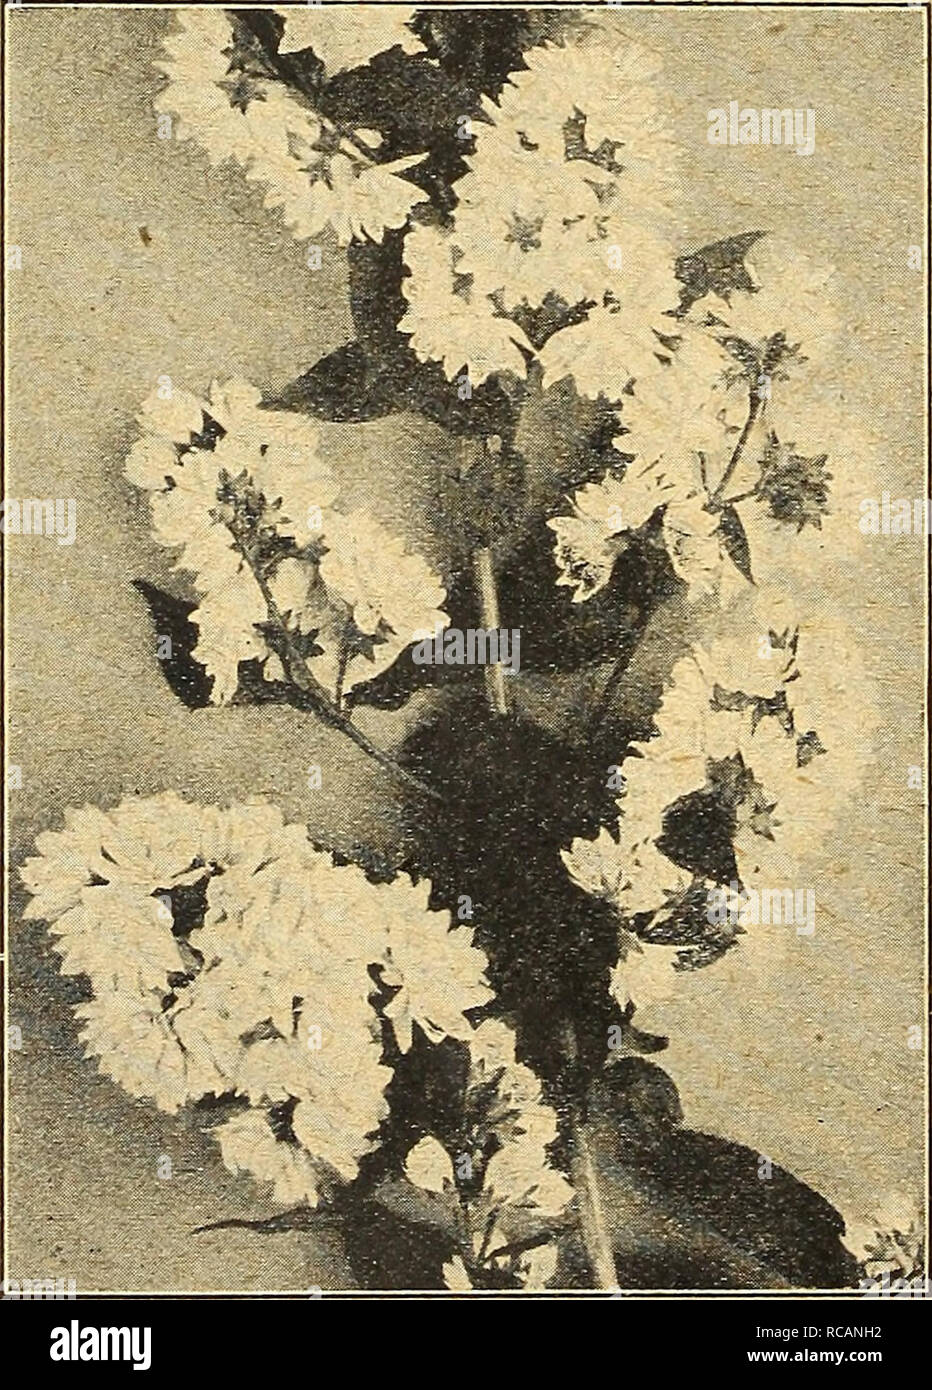 . Dreer's autumn catalogue 1924. Bulbs (Plants) Catalogs; Flowers Seeds Catalogs; Gardening Equipment and supplies Catalogs; Nurseries (Horticulture) Catalogs; Vegetables Seeds Catalogs. 58 /HEHByA-BREEl GHGIGE HARDY SHRUBS 'fflMMHRlS^ Cornus Florida Rubra {Red-flowering Dogwood). A rare variety, the flowers of which are rich rosy red. The two varieties make a fine contrast. Plants, 3 to 4 feet high, $1.50 each. â Sanguinea {Red-twigged Dogwood). A strong growing bush, with crimson-colored branches; especially attractive in winter. 60 cts. each. Desmodium Penduliflorum. A Shrub which dies to t Stock Photo